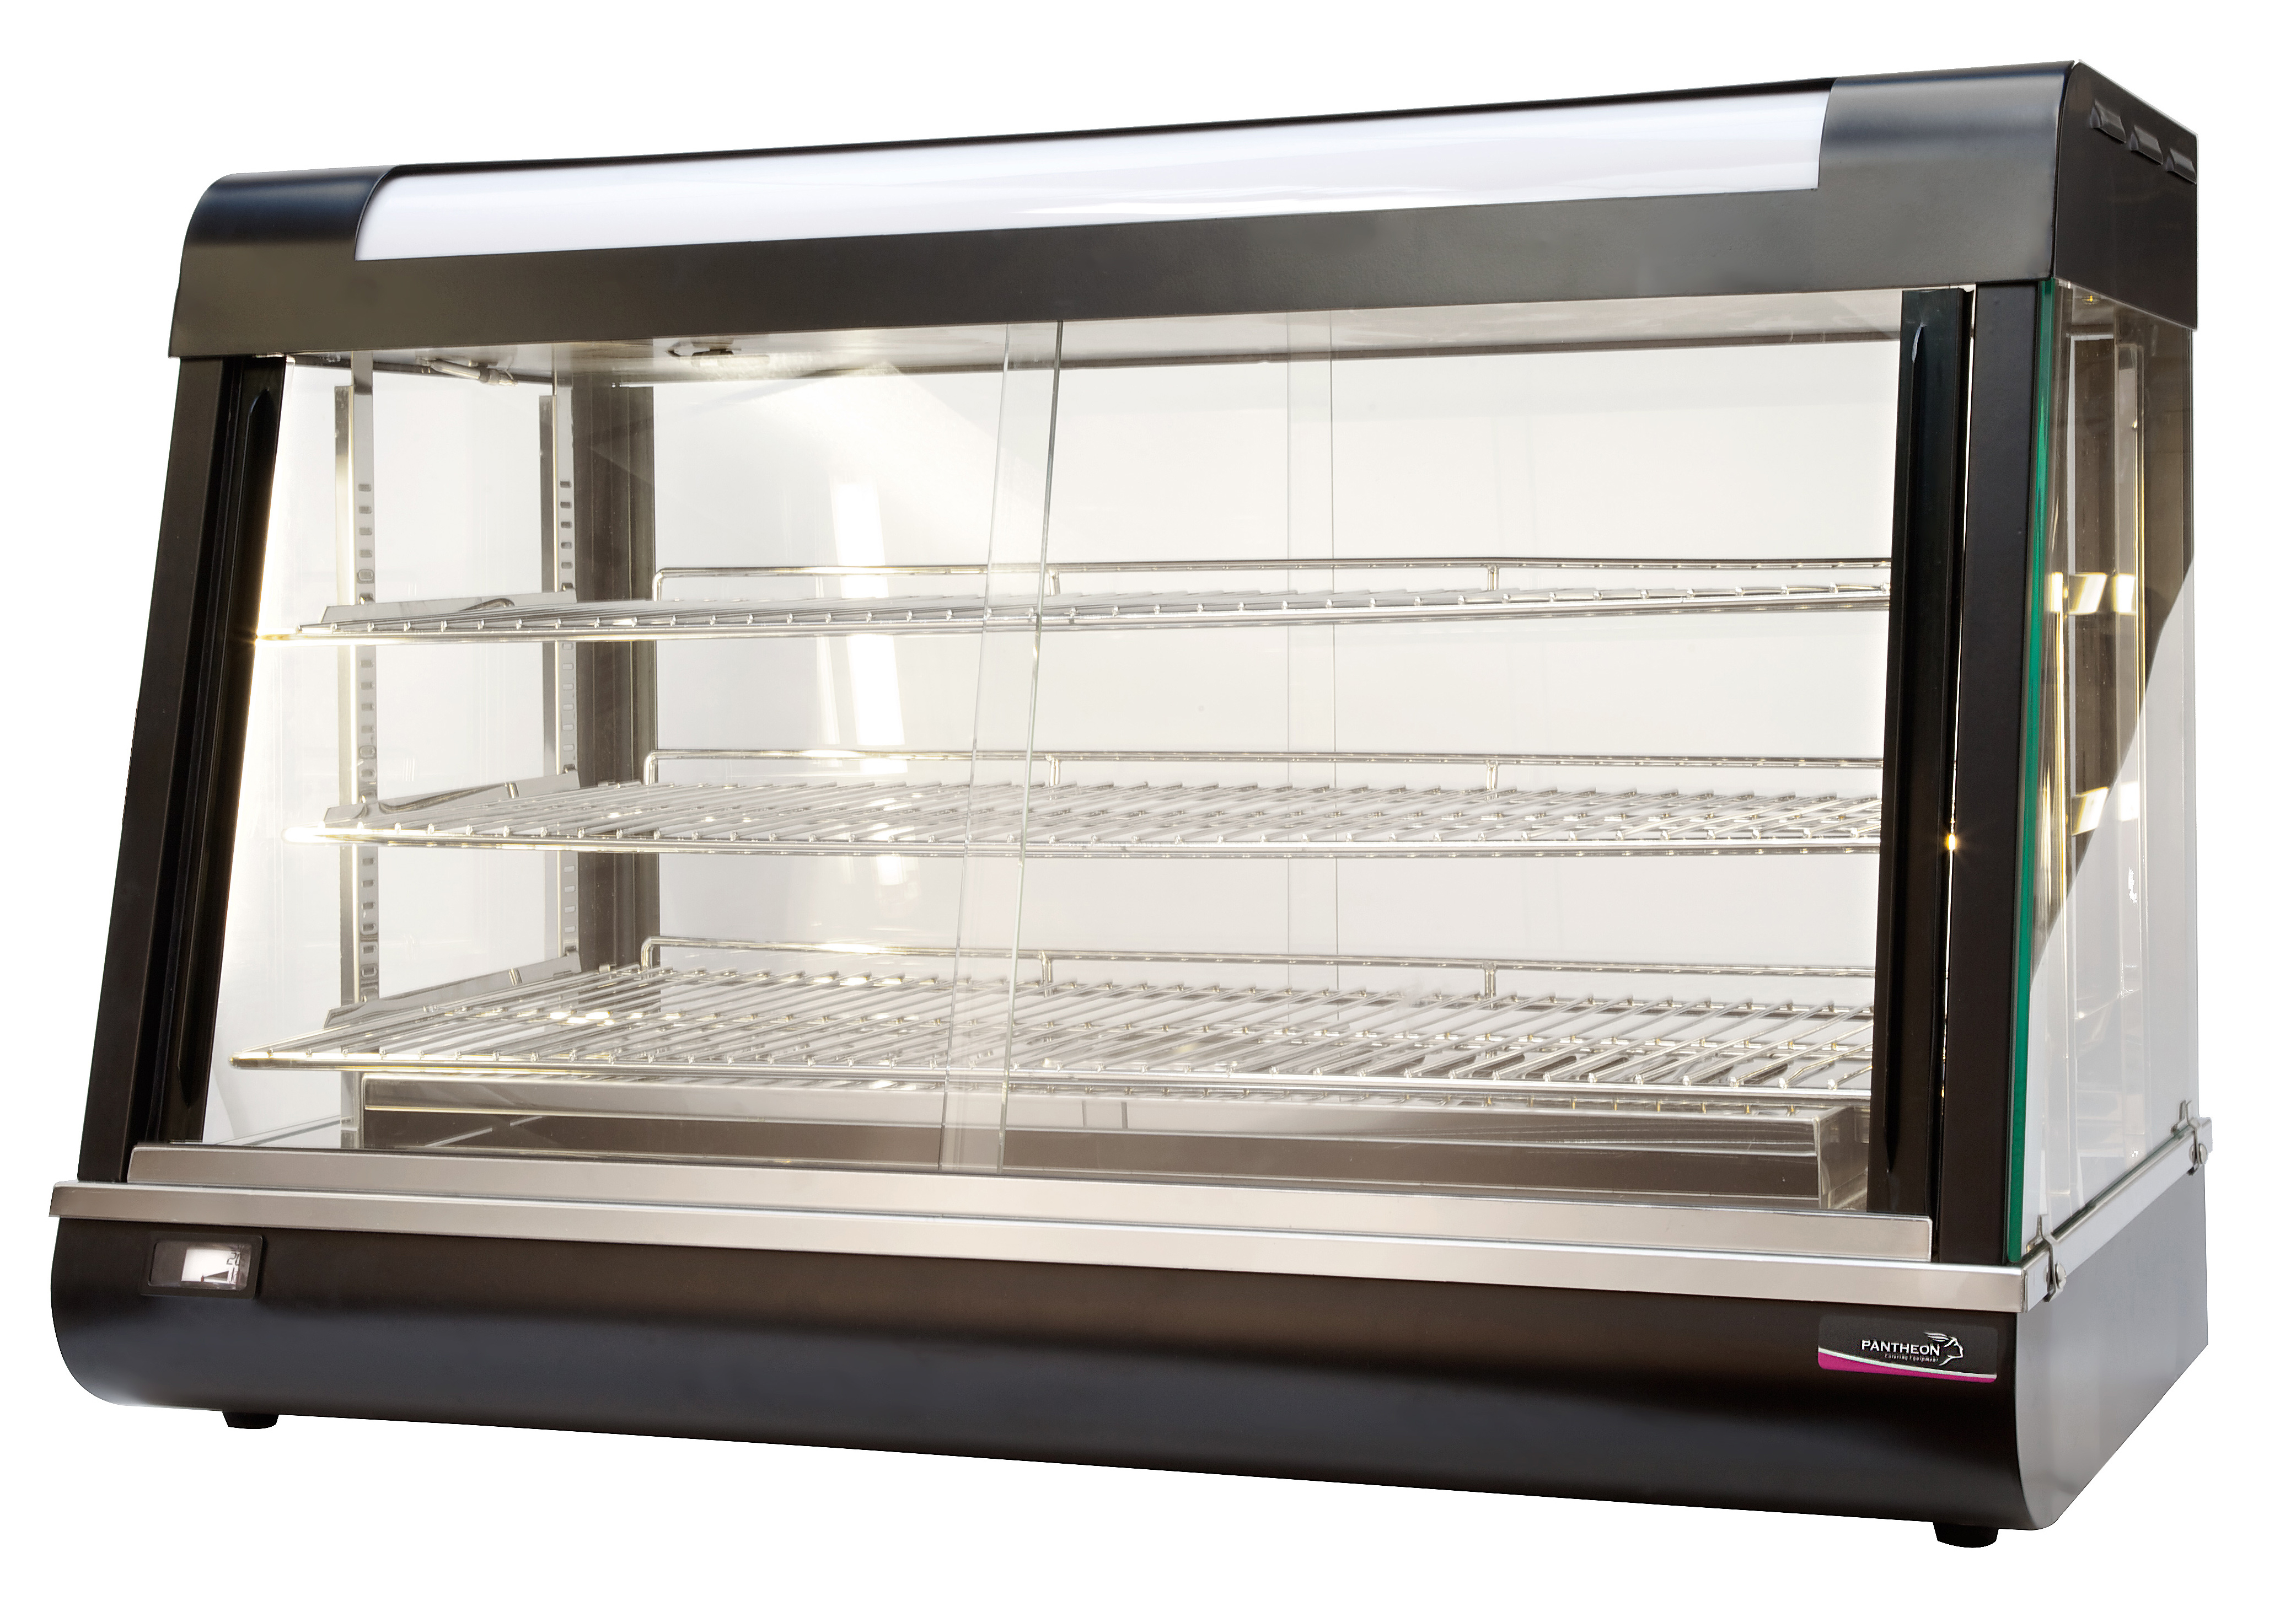 Hdc2 Medium Capacity Heated Display Cabinet Pantheon Catering with regard to dimensions 4164 X 2904